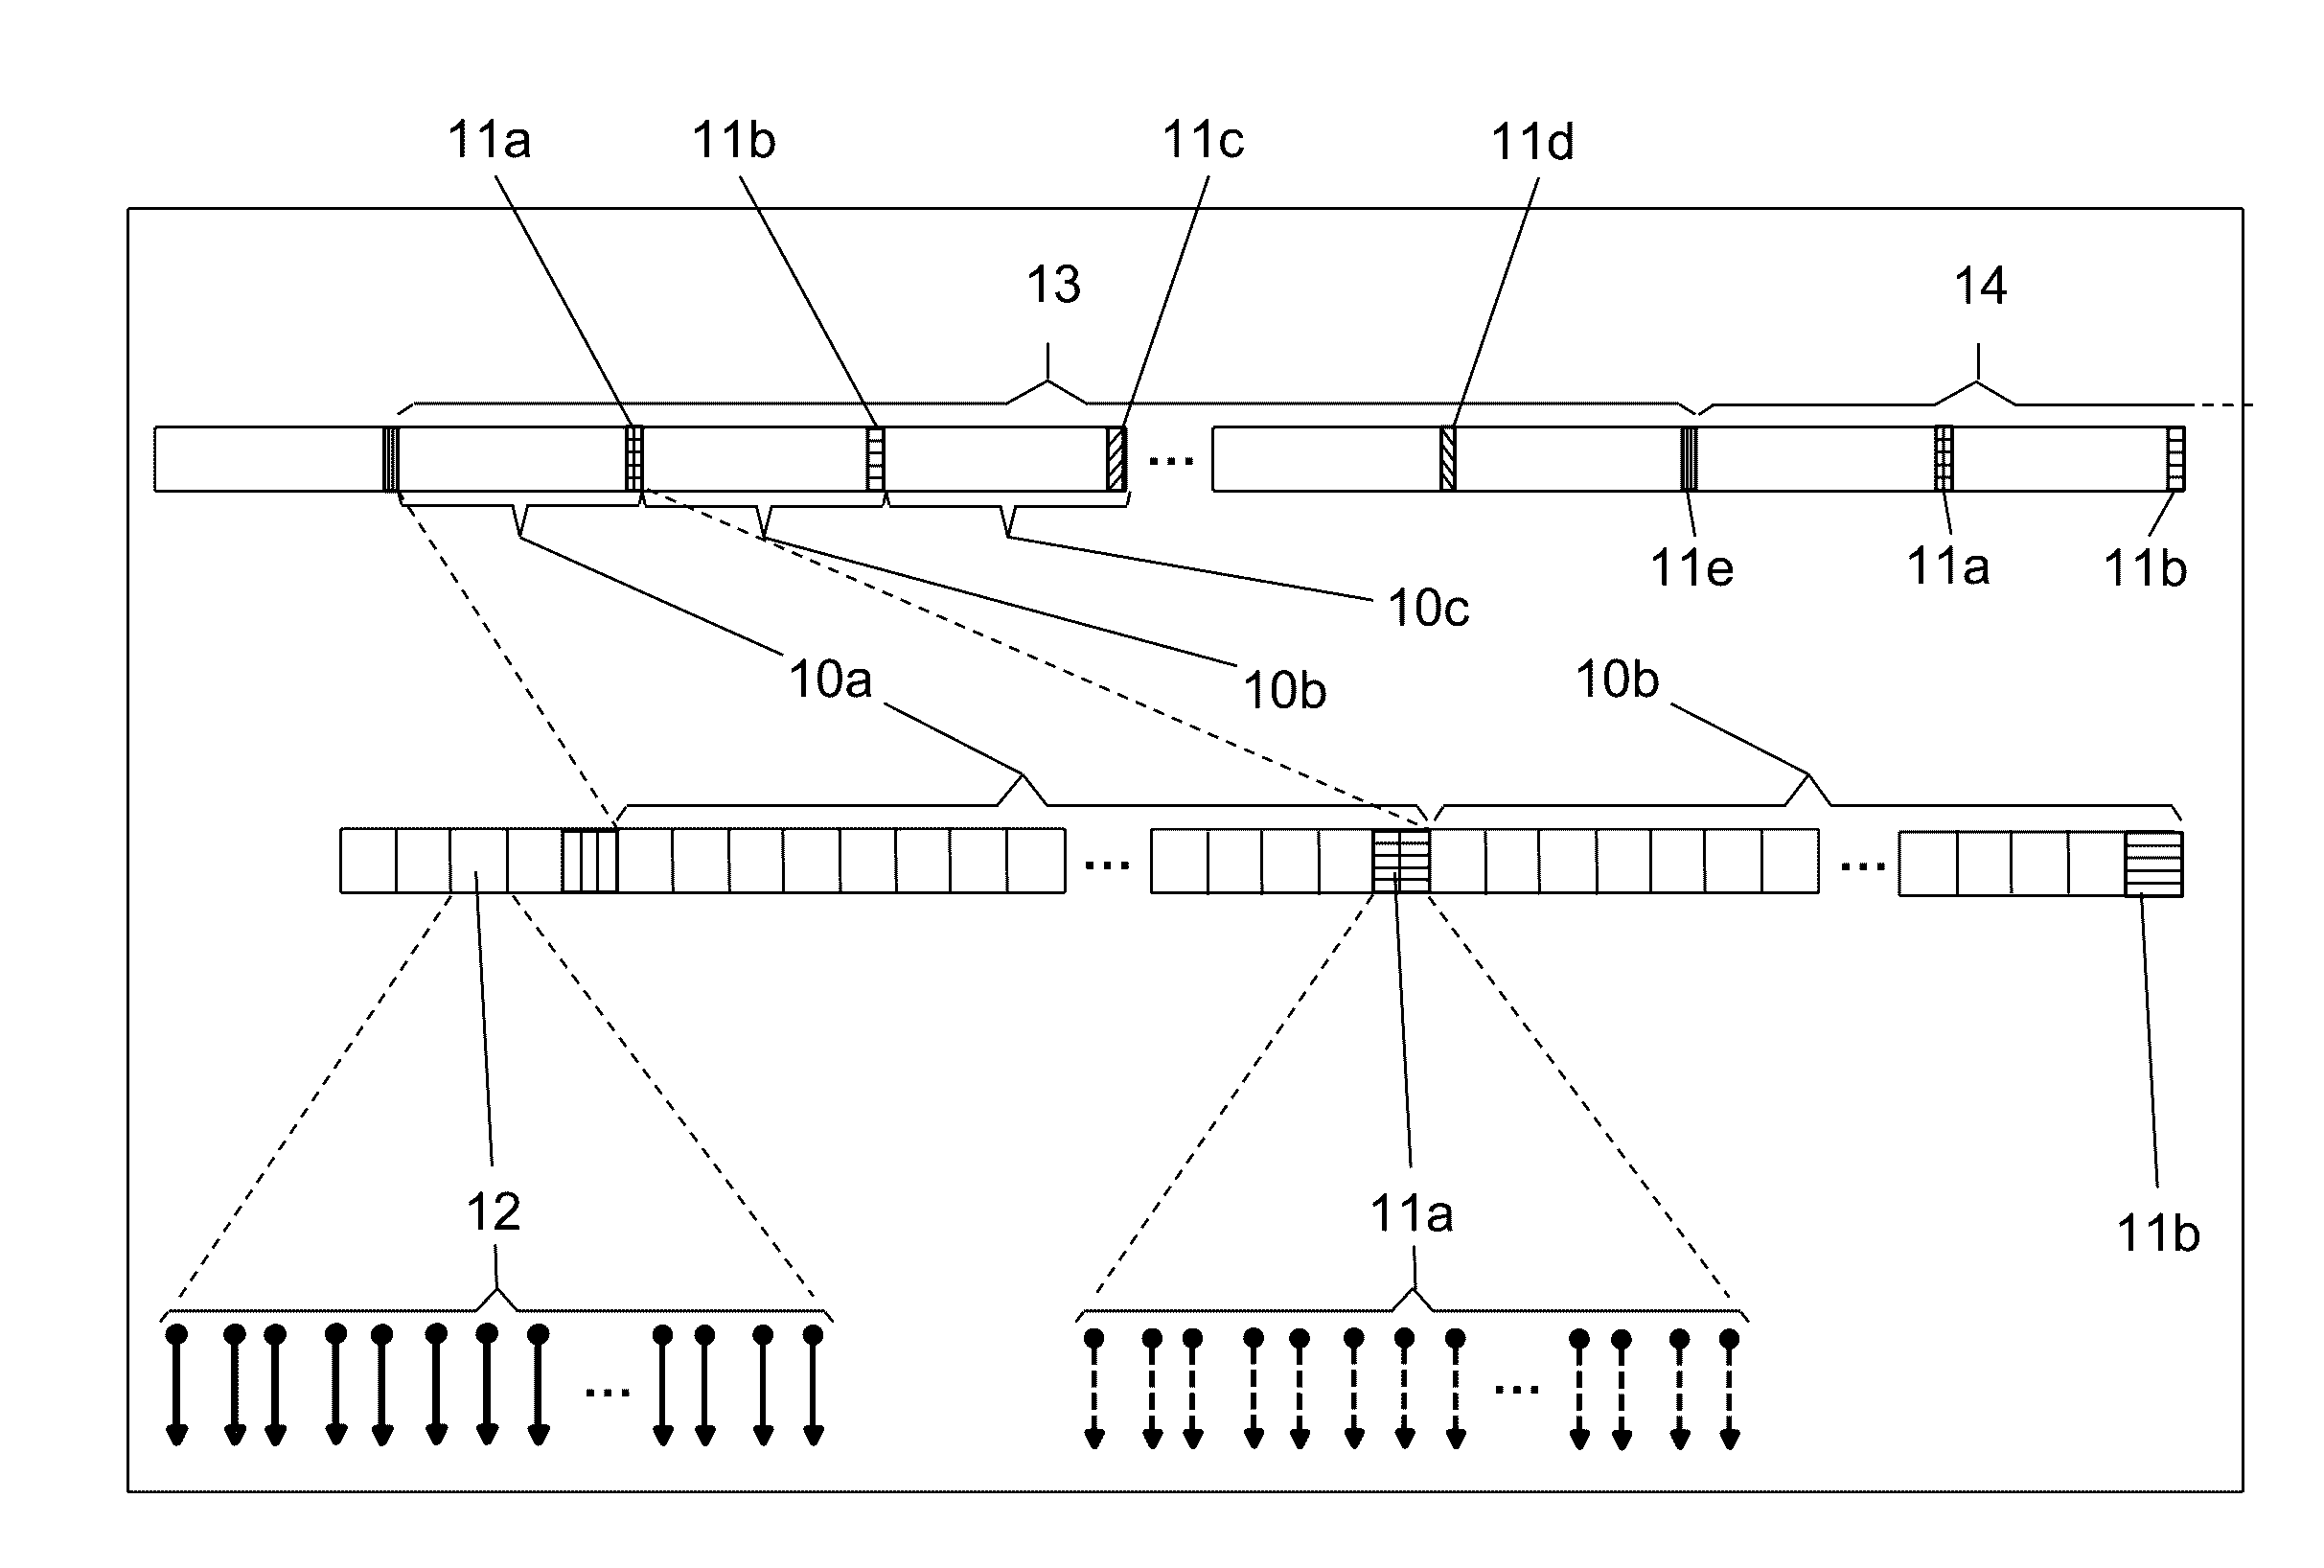 Framing scheme for continuous optical transmission systems